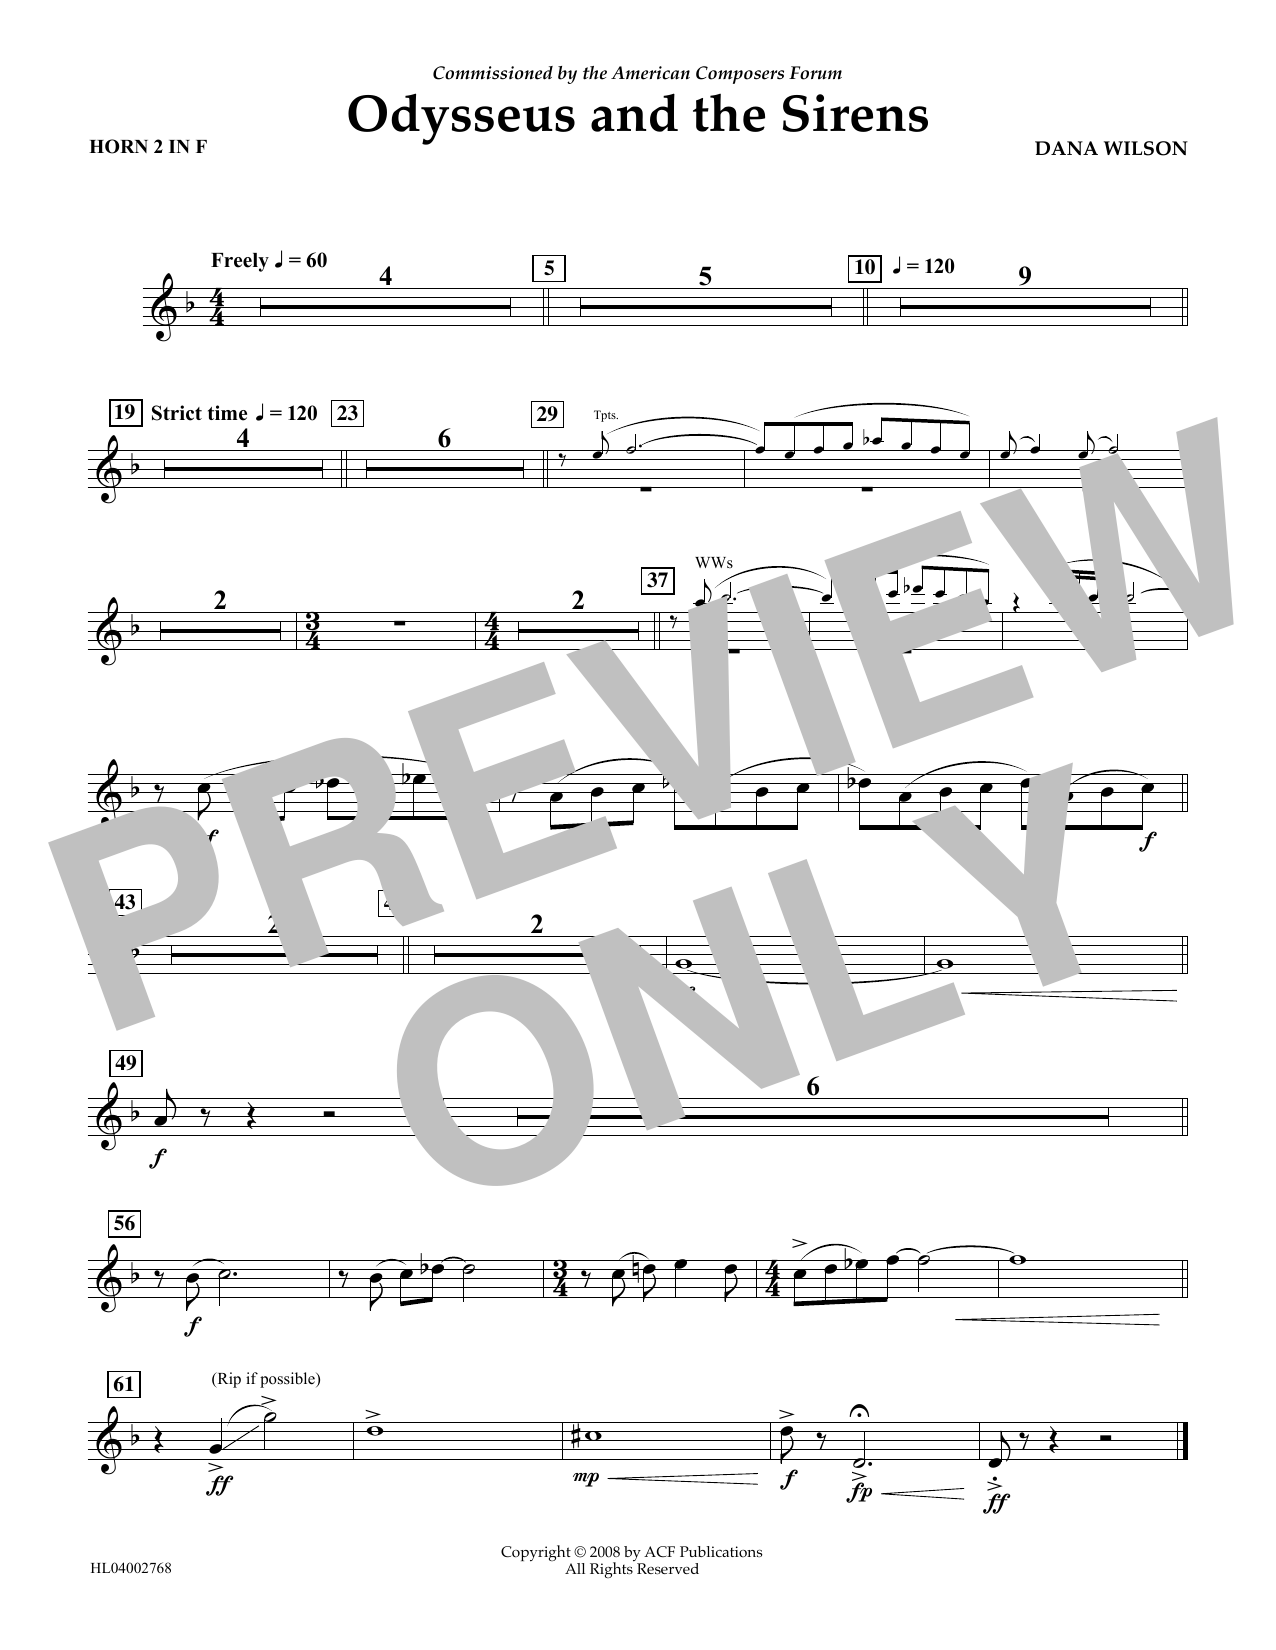 Download Dana Wilson Odysseus and the Sirens - F Horn 2 Sheet Music